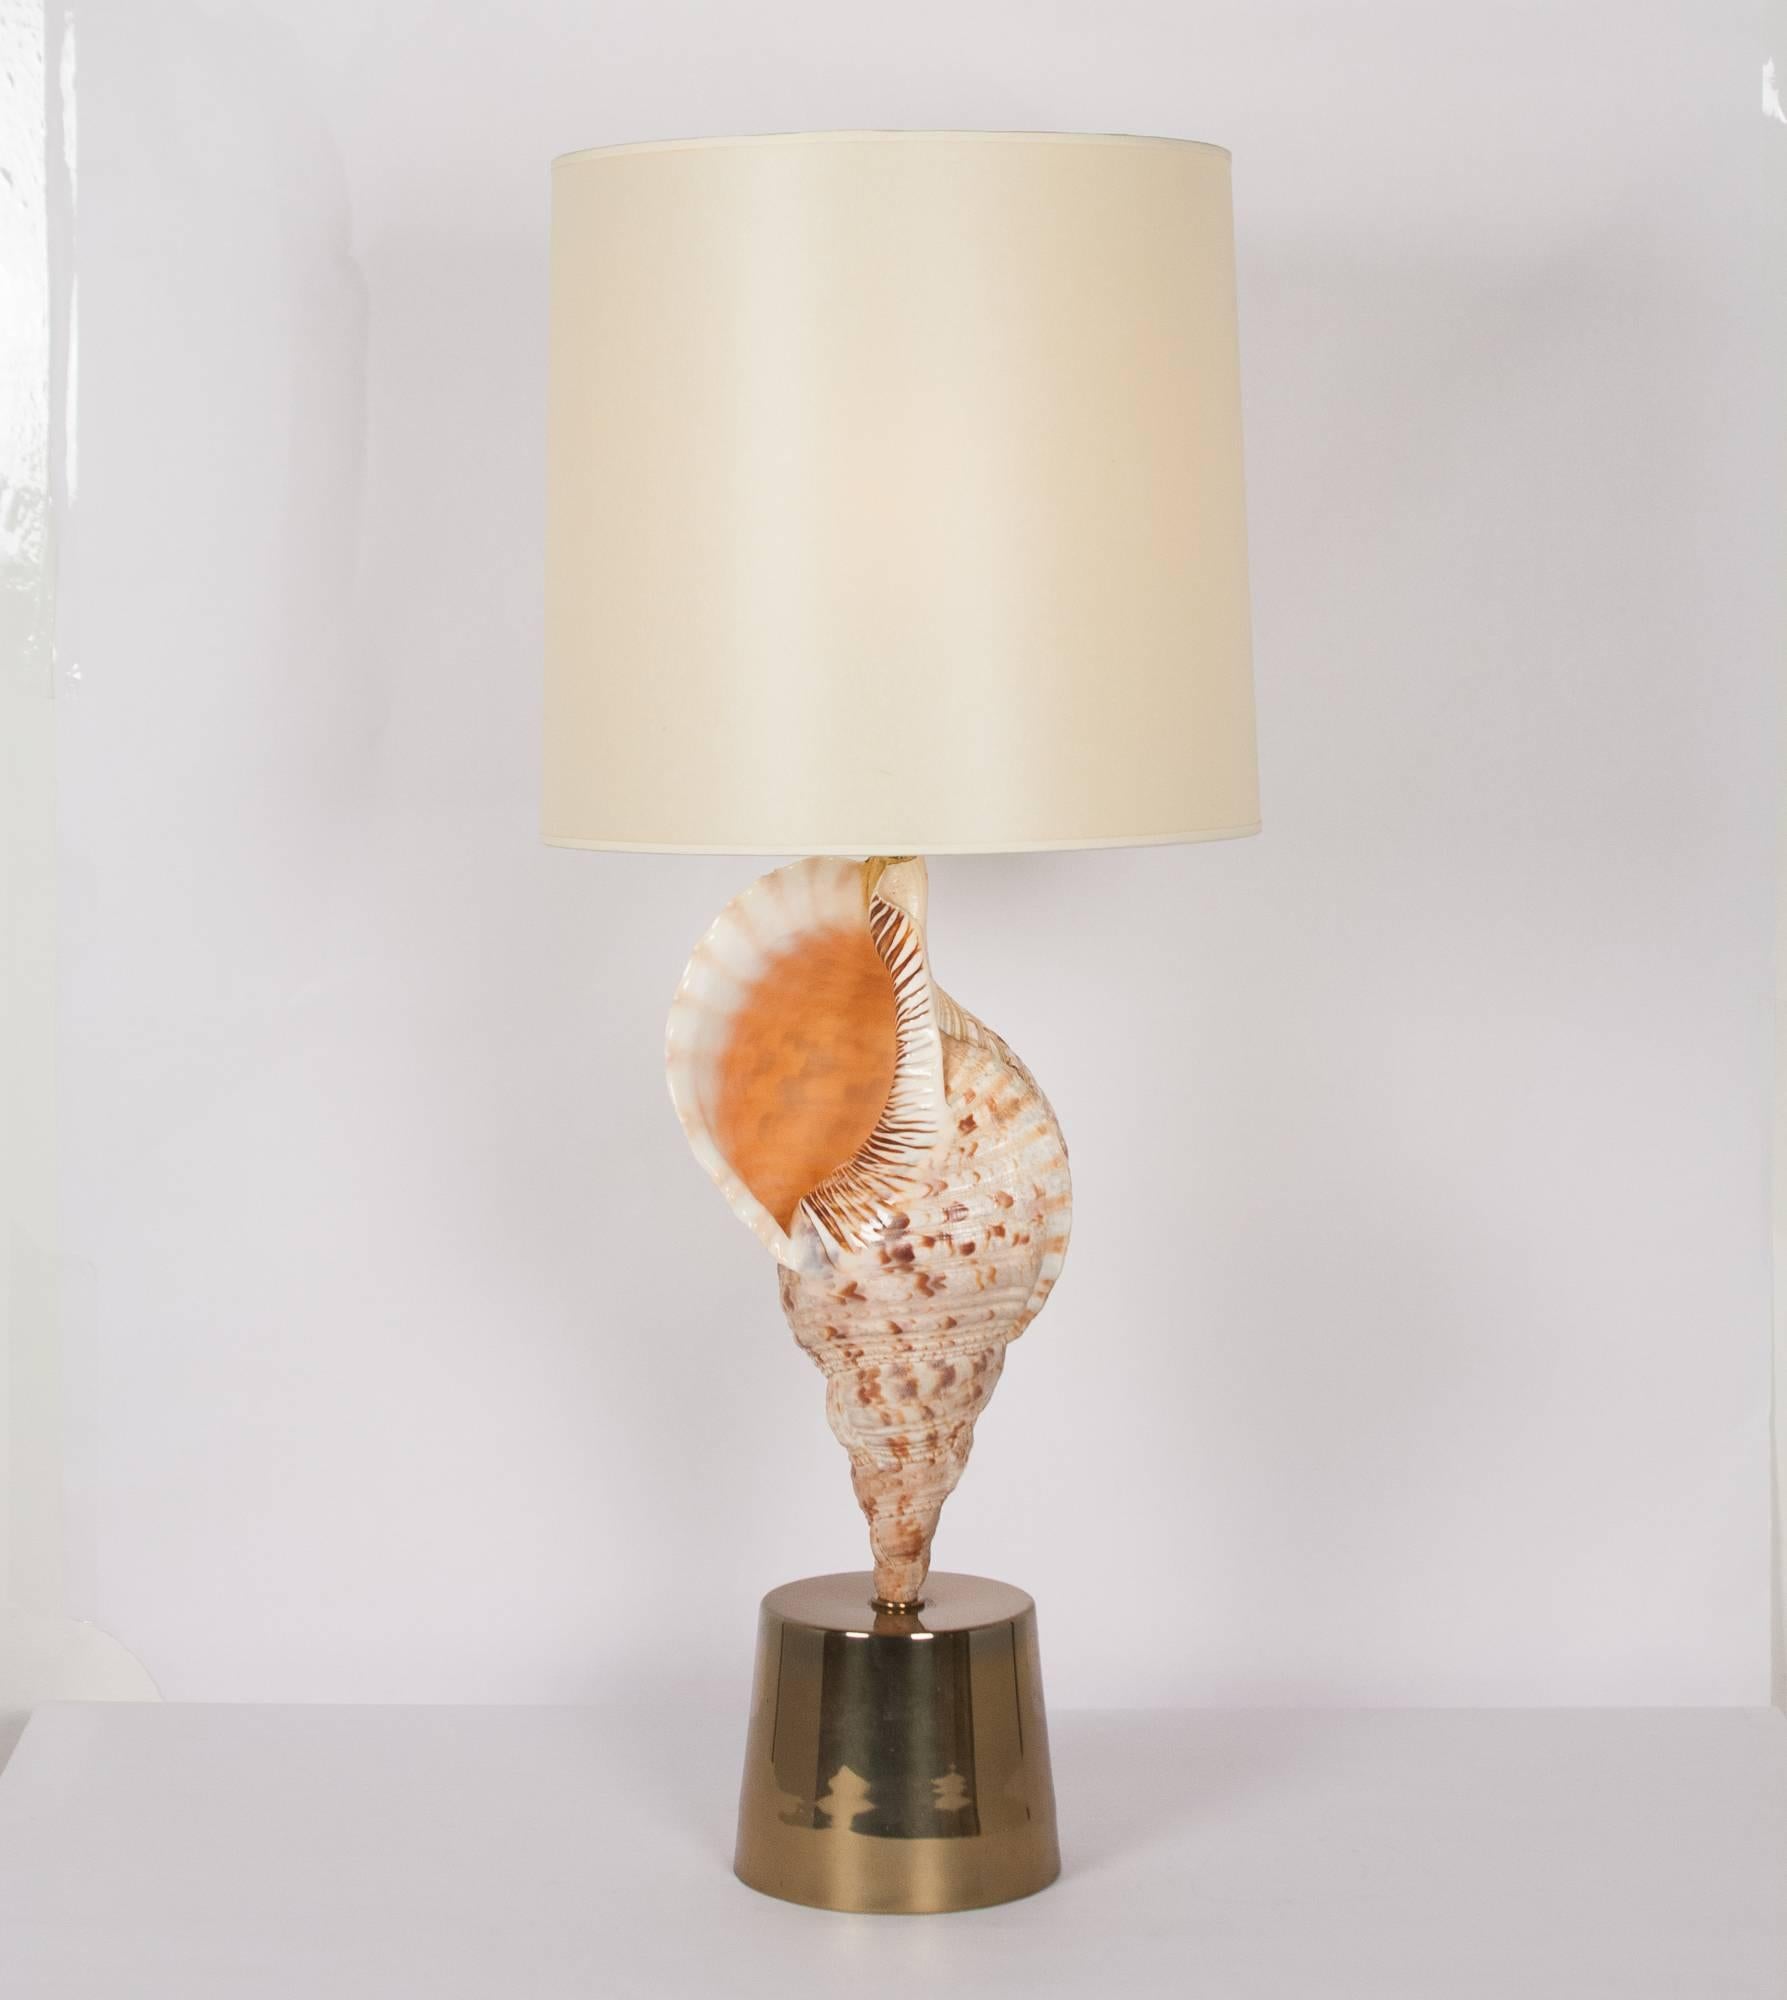 Large Mounted Seashell Table Lamp by Charles et Cie, French, 1970s For Sale 2